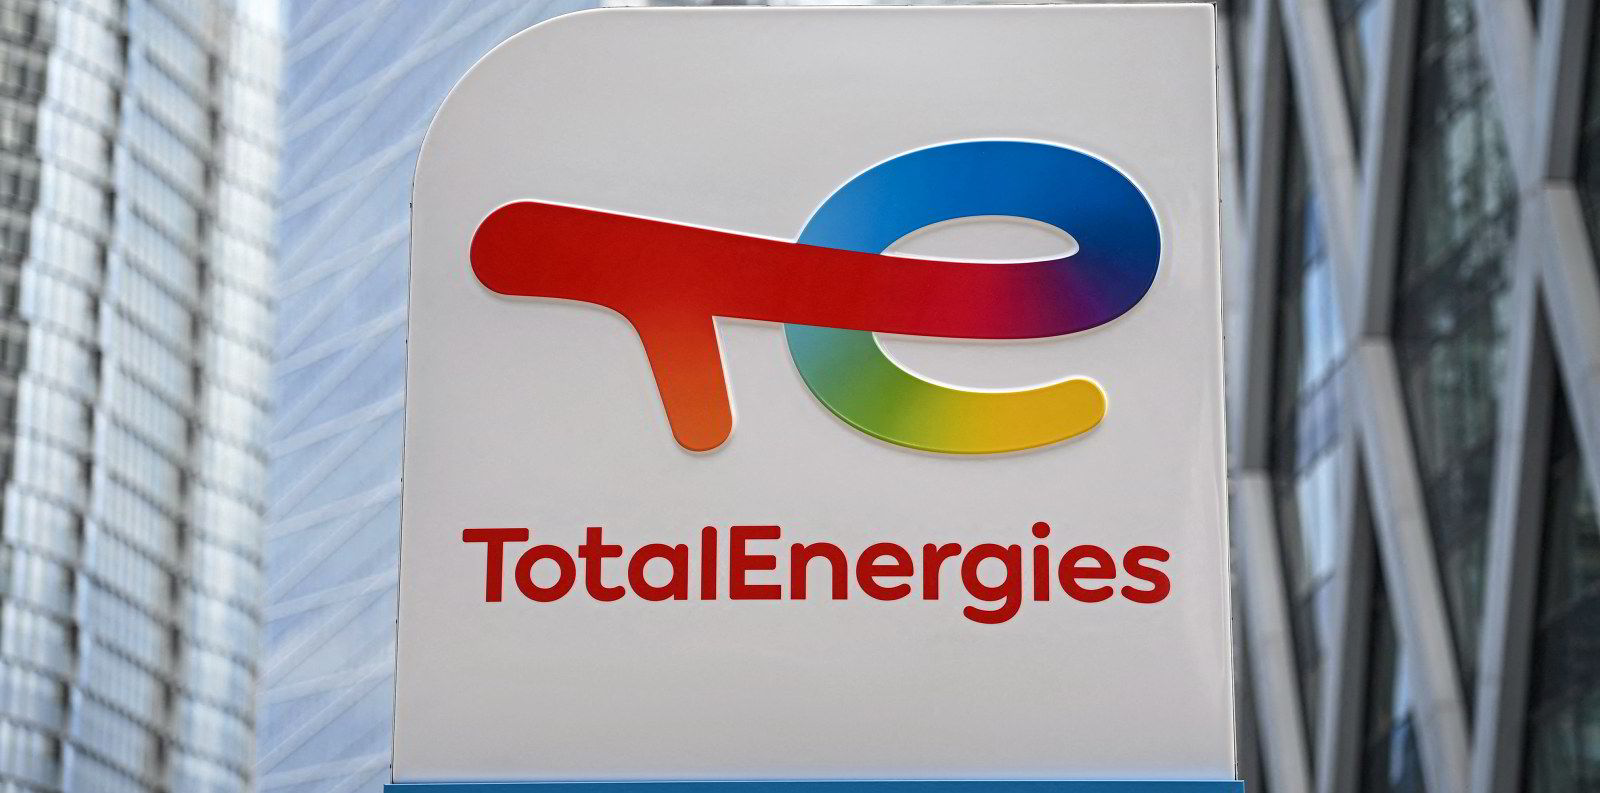 TotalEnergies Macquarie group to bid in high-profile offshore wind lease | Recharge